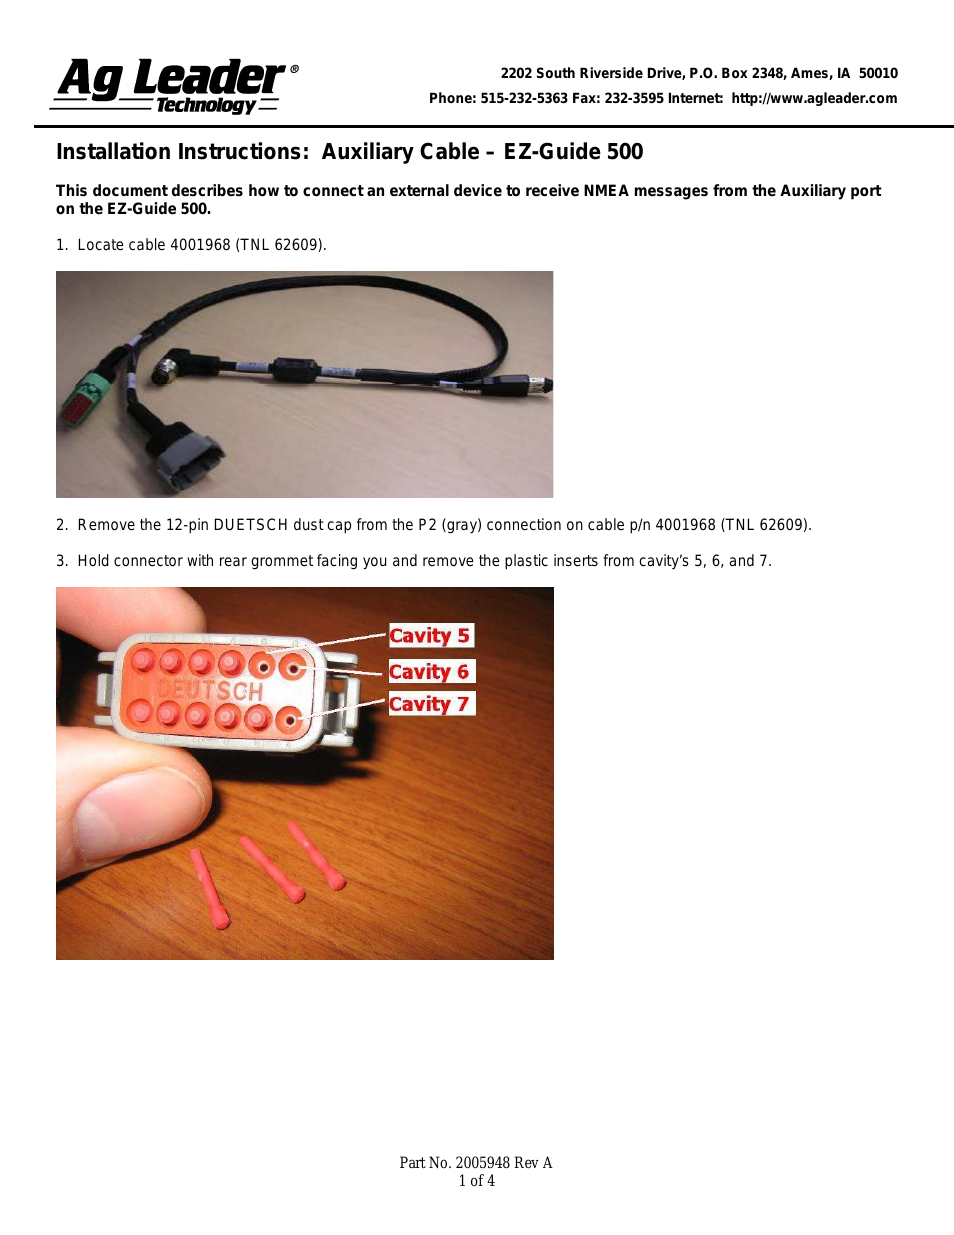 EZ-Guide 500 Auxiliary Cable Installation